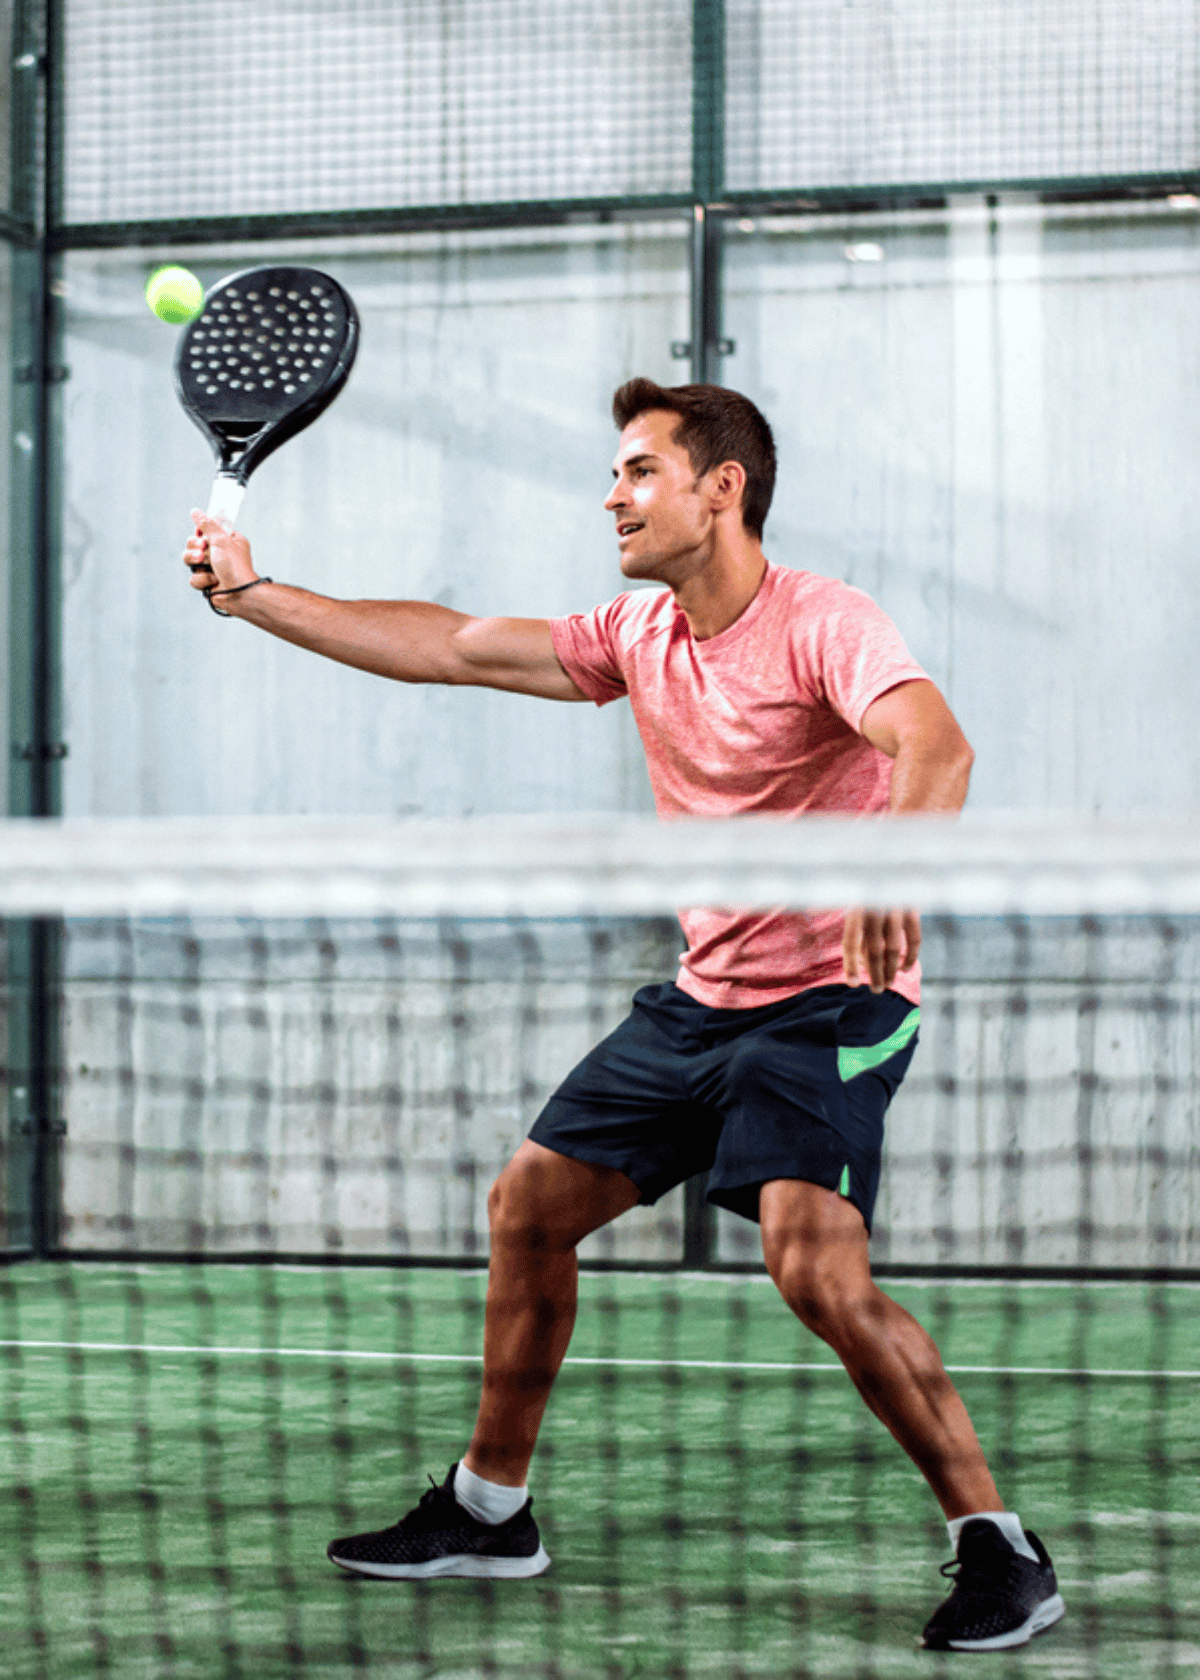 Best Mens Pickleball Outfits To Look Good on the Court